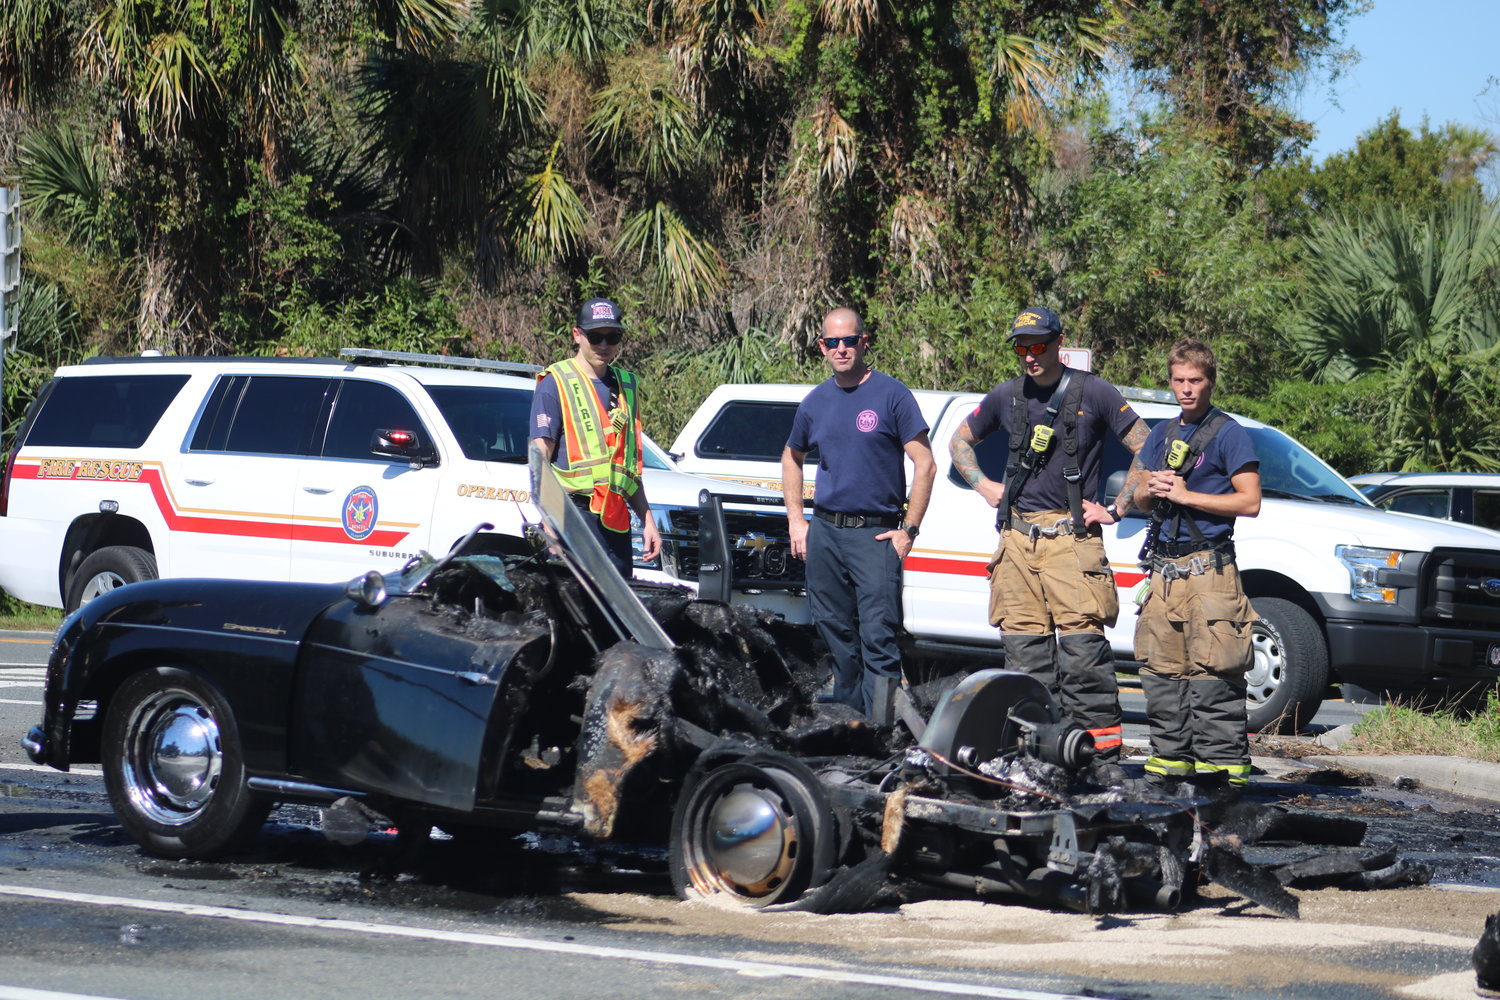 Members of St. Johns County Fire Rescue Station 10 look on after extinguishing a car fire near the intersection of A1A and Mickler Road Oct. 26.